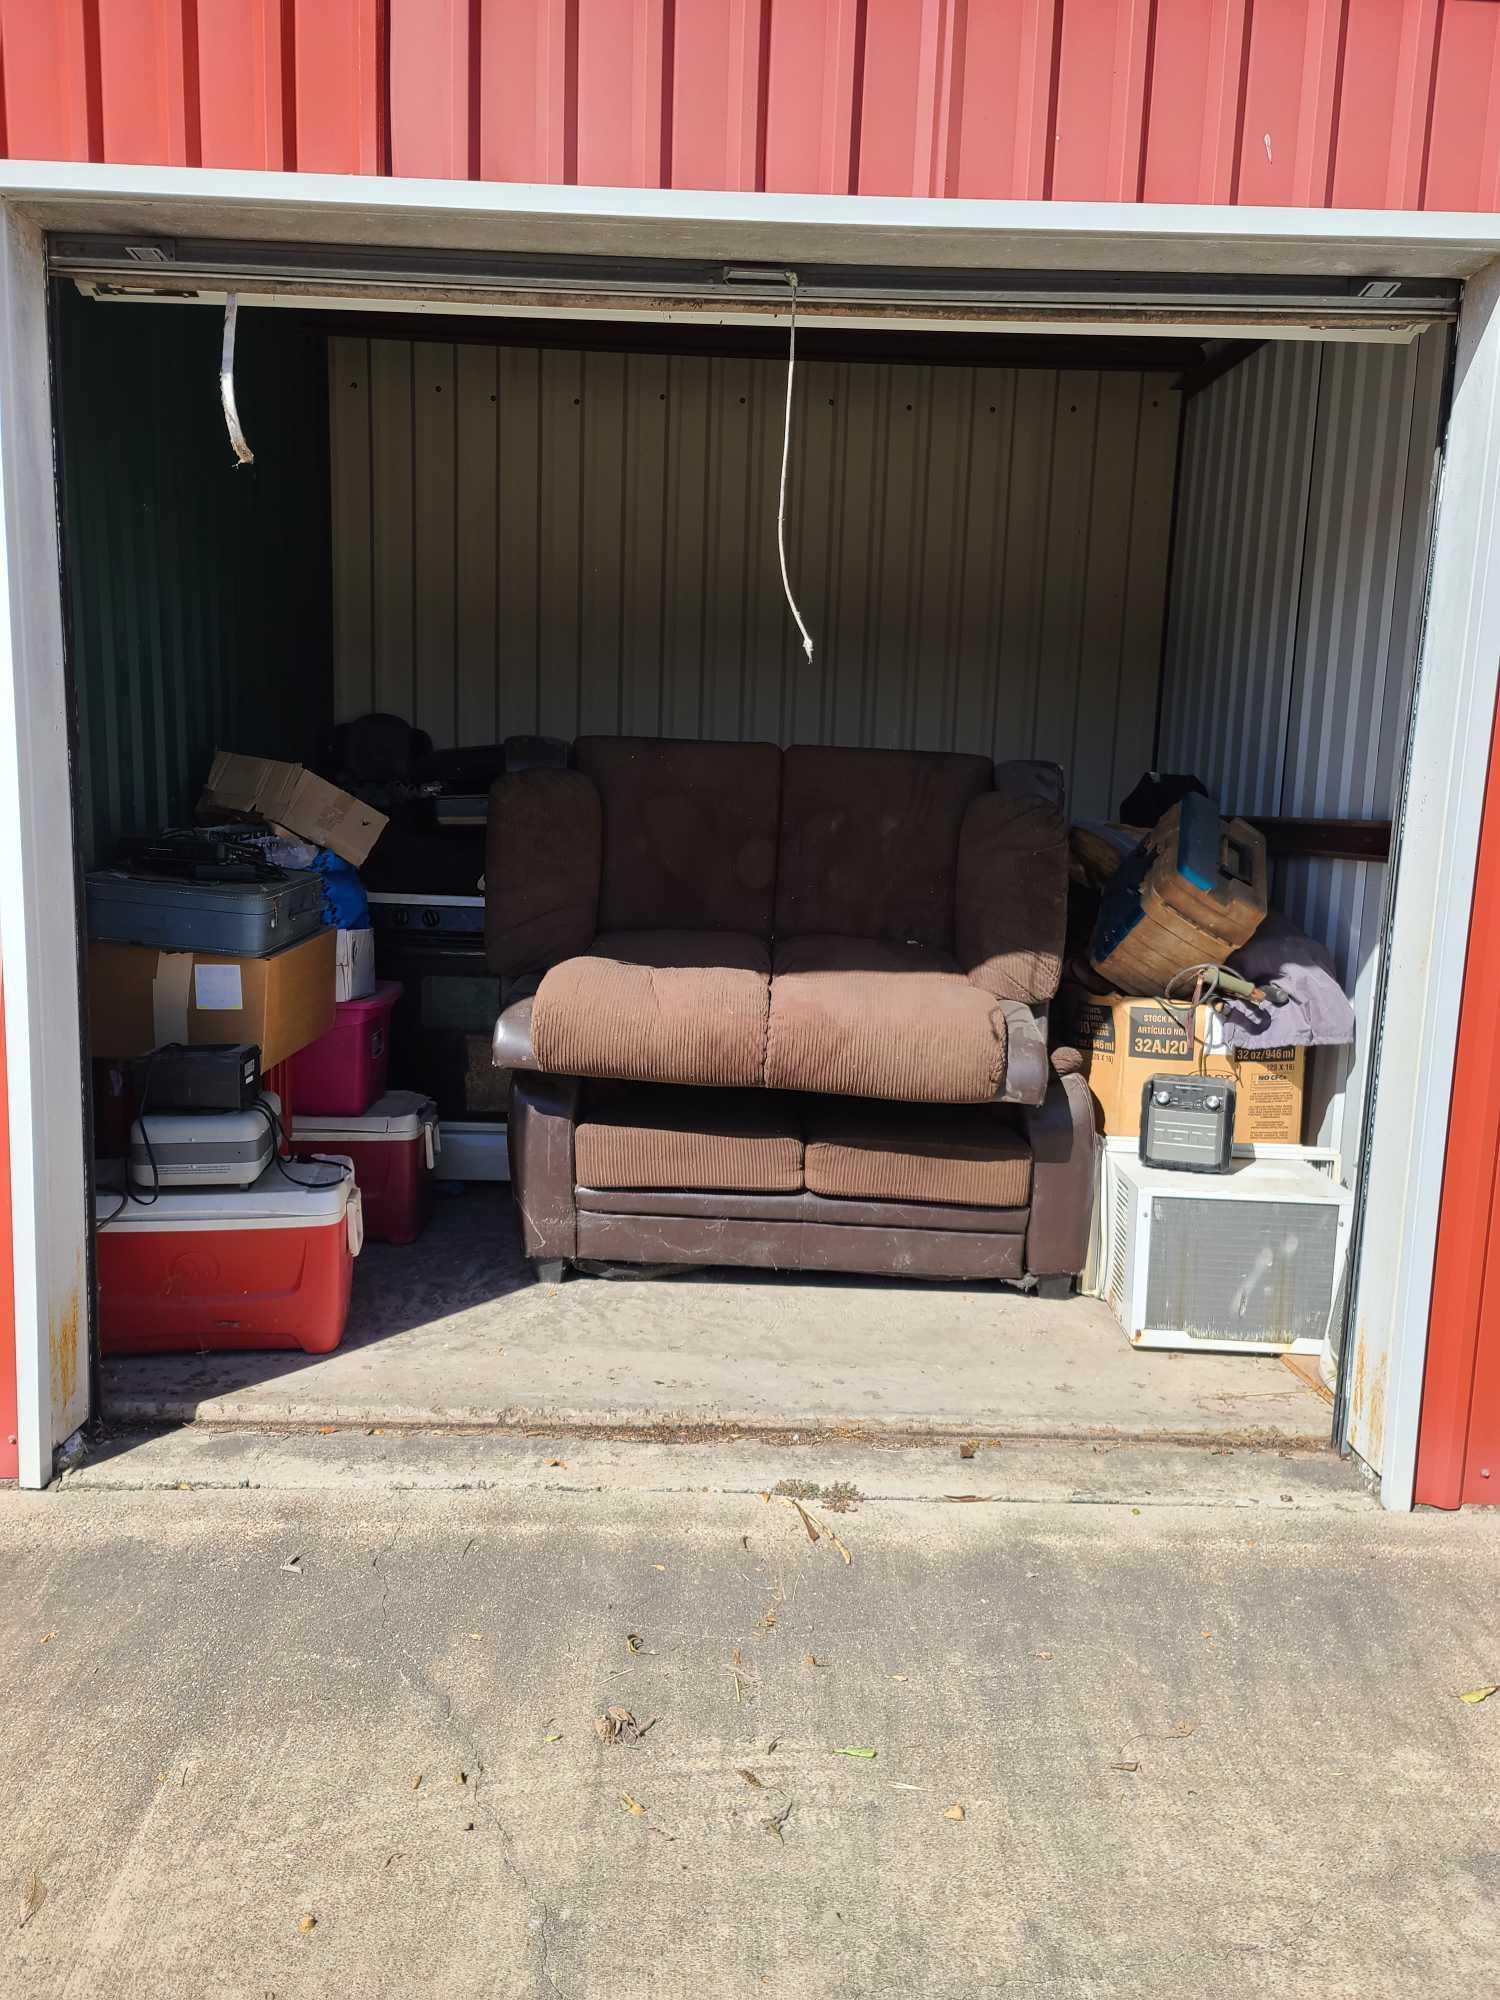 (UNIT # 52) 10x20 Couches, coolers, suitcase, air conditioner, child's car seat, grill